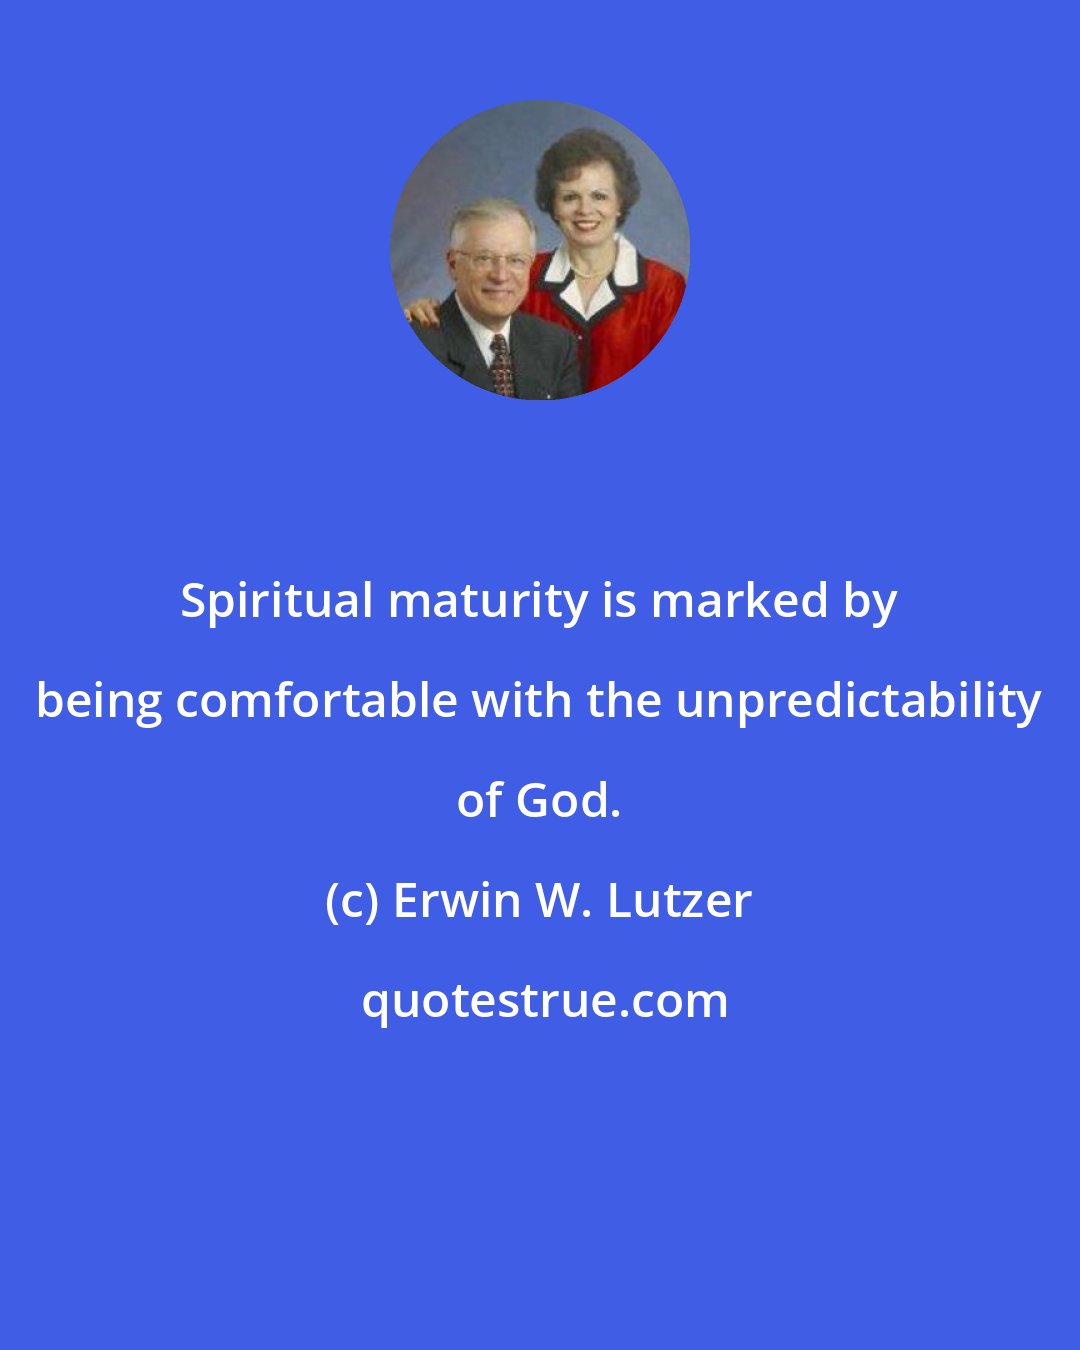 Erwin W. Lutzer: Spiritual maturity is marked by being comfortable with the unpredictability of God.